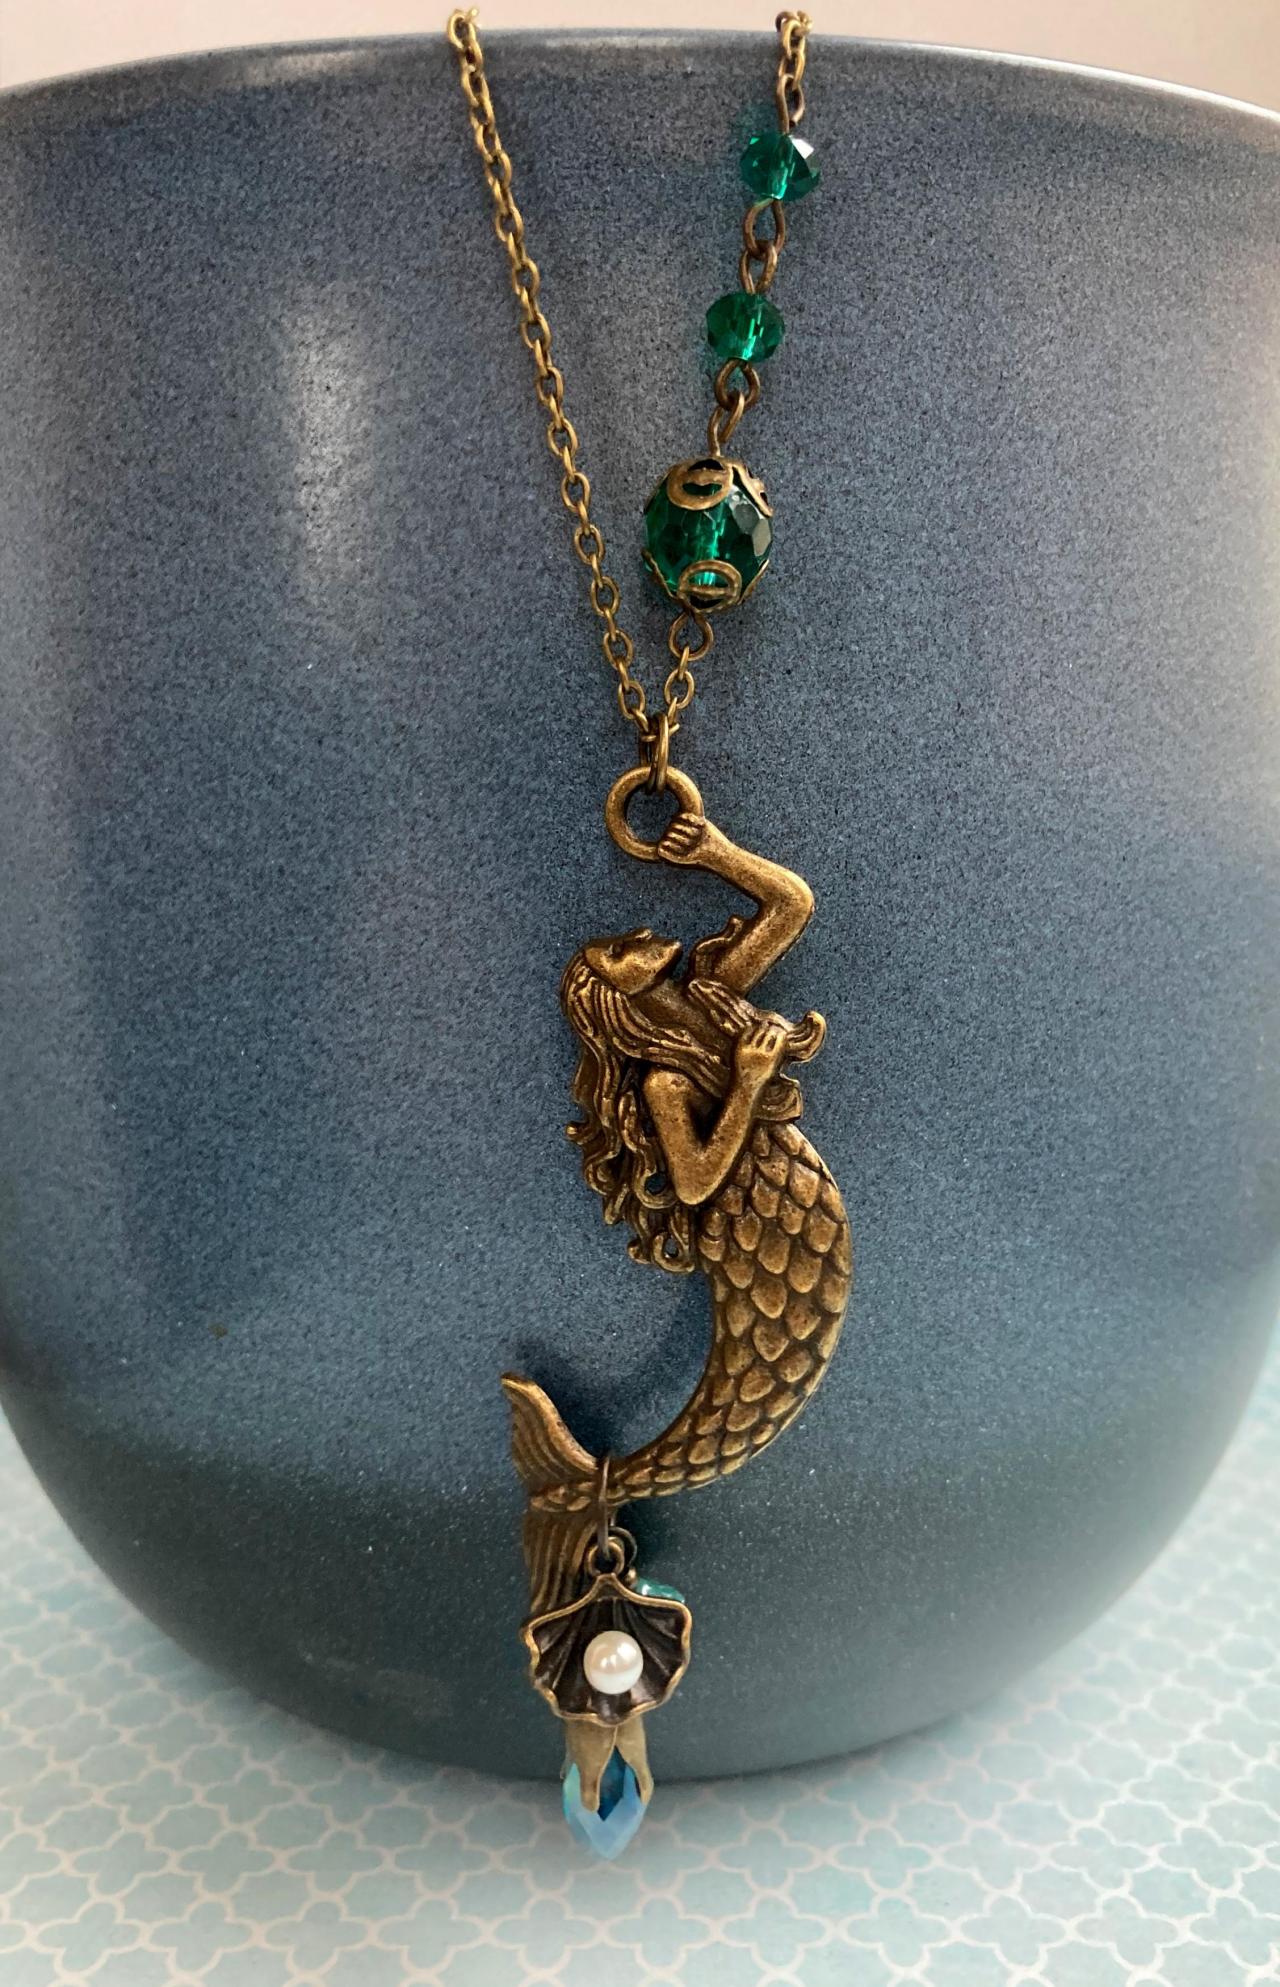 Whimsical Mermaid Necklace With Teal Glass Beads, Selma Dreams